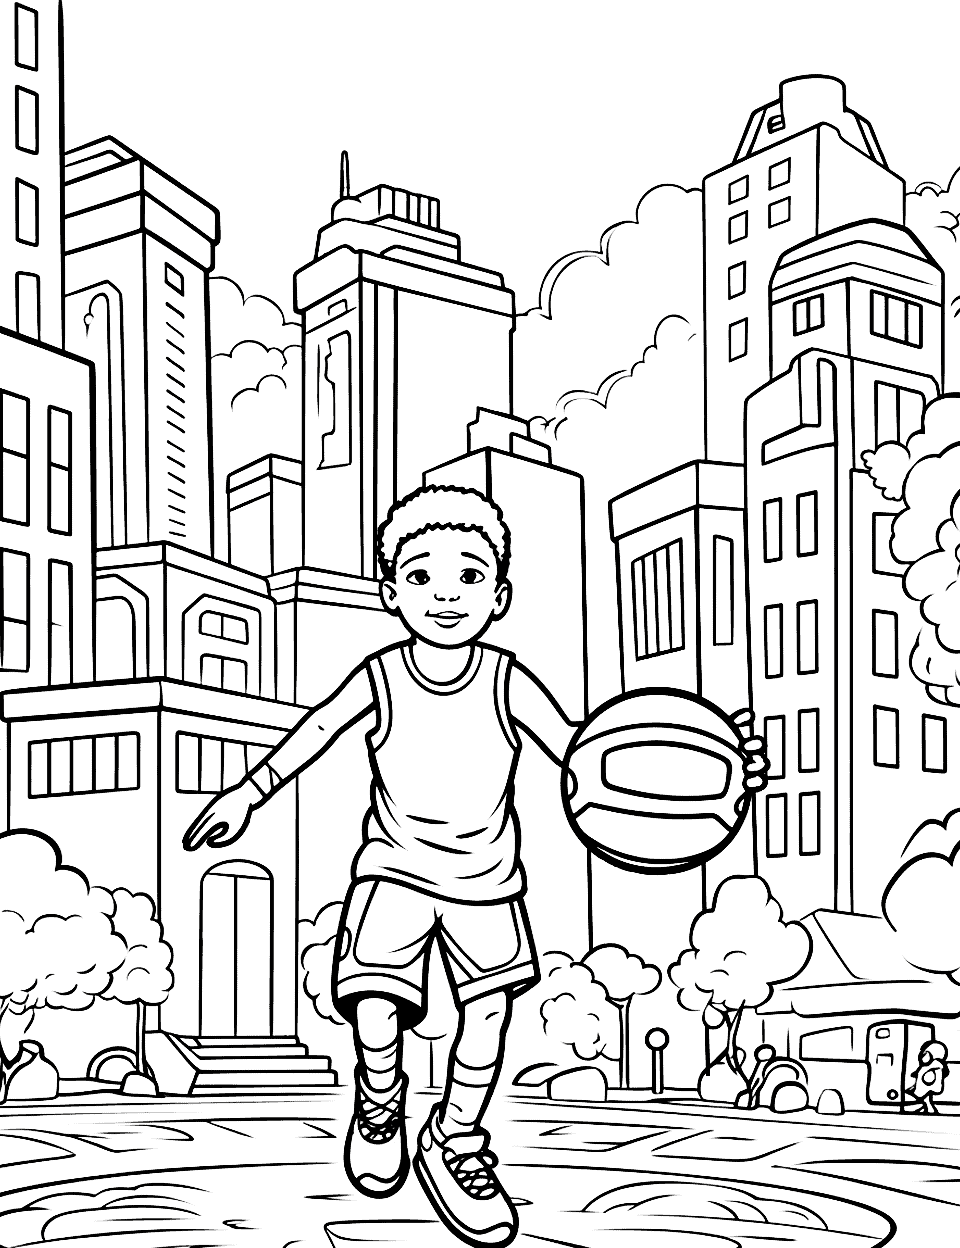 Futuristic City Game Basketball Coloring Page - Child playing basketball in a detailed futuristic city.